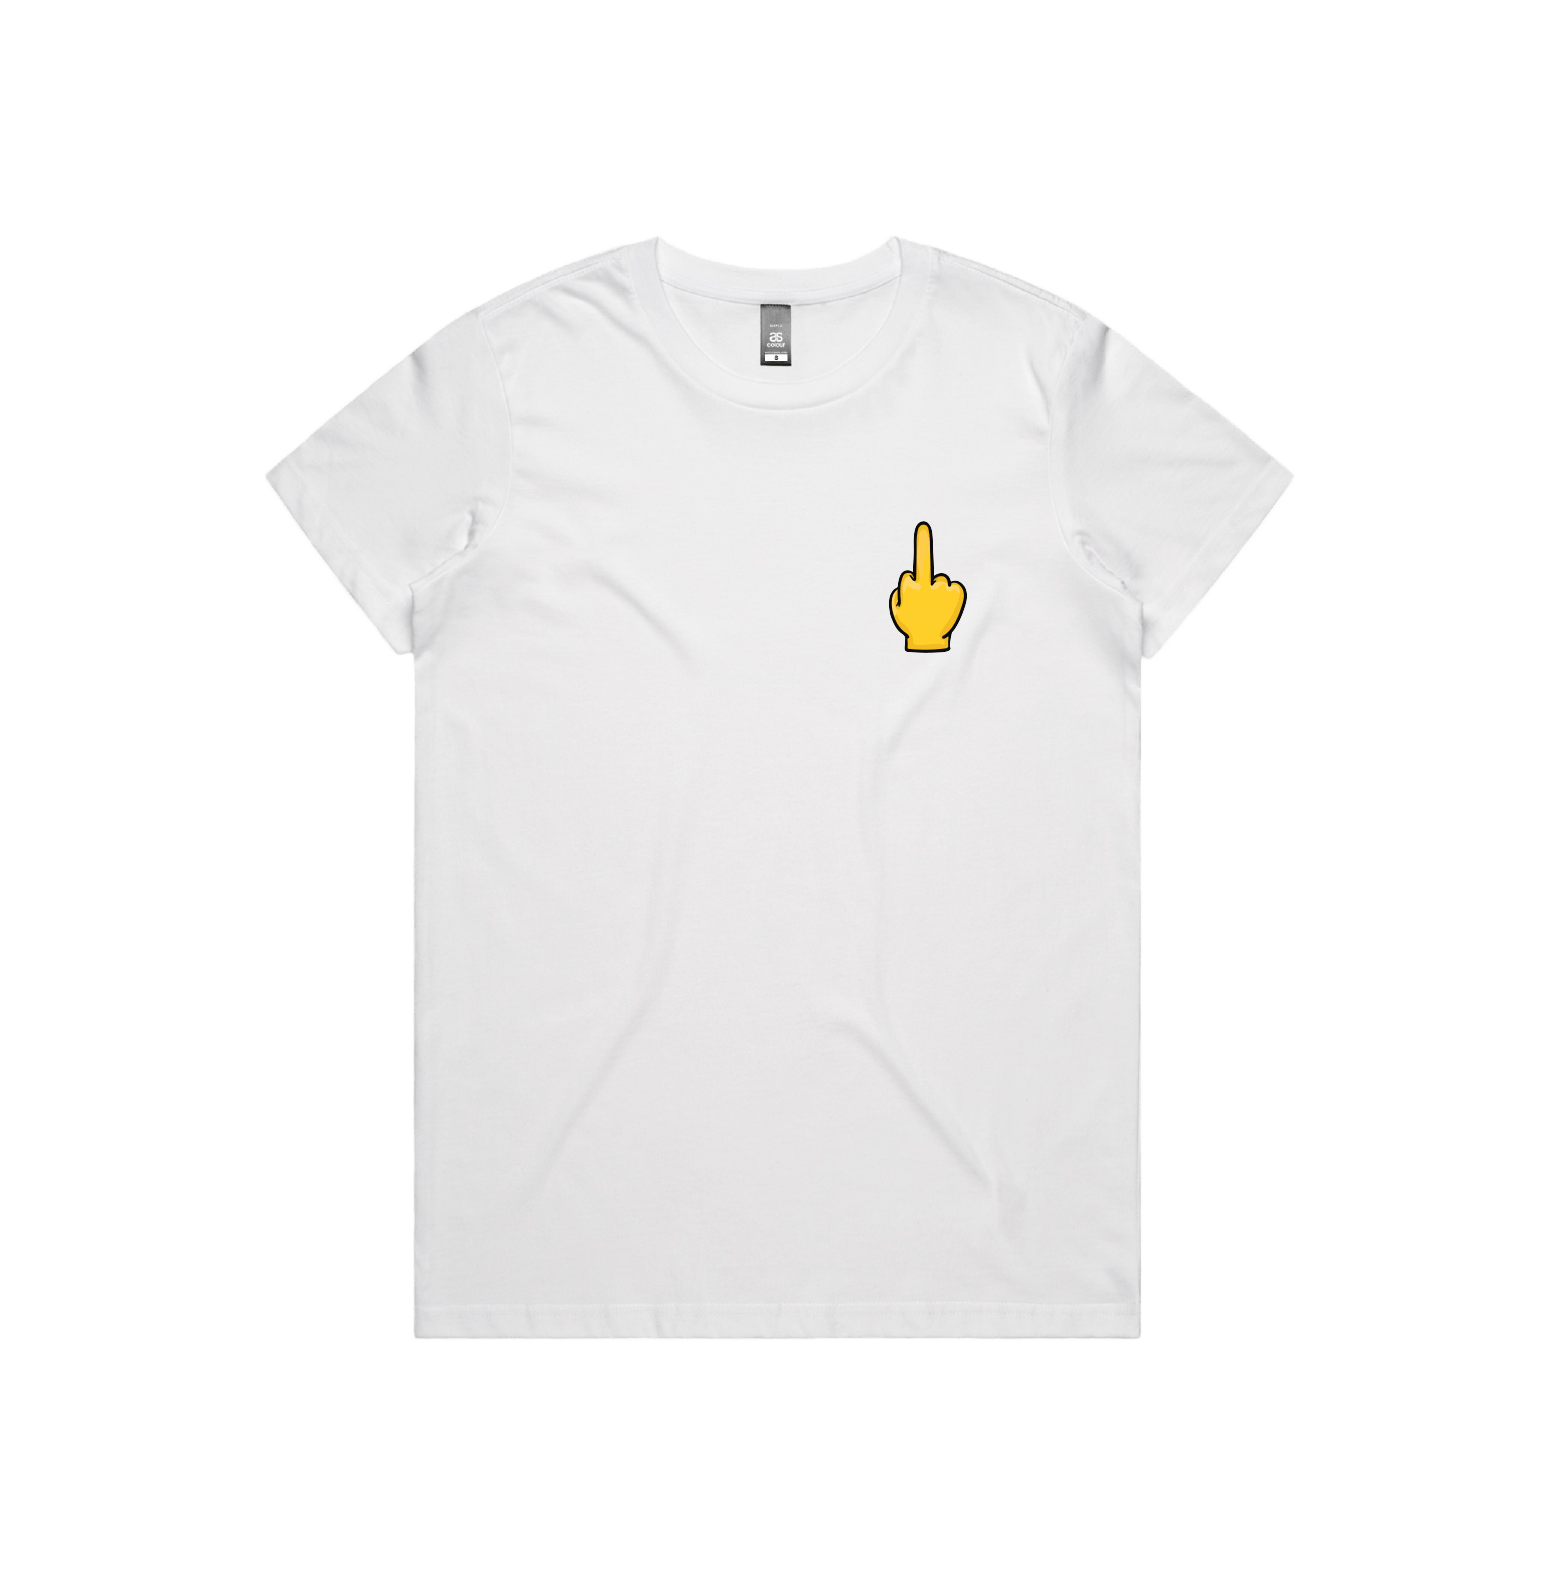 XS / White / Small Front Design Up Yours 🖕 - Women's T Shirt